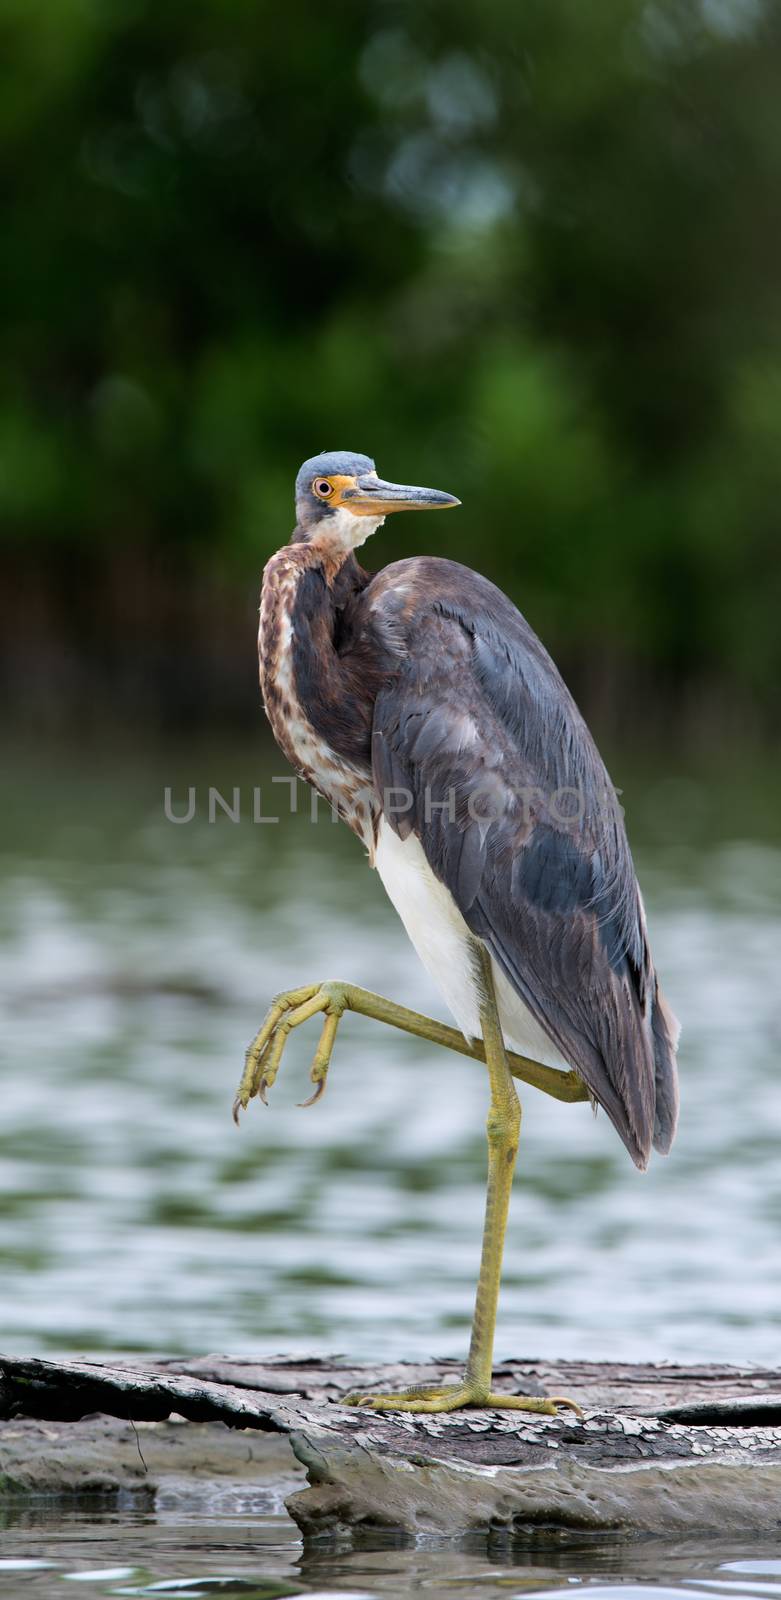 Tricolored heron (Egretta tricolor) wading in shallow water . The tricolored heron (Egretta tricolor), formerly known in North America as the Louisiana heron, is a small heron.